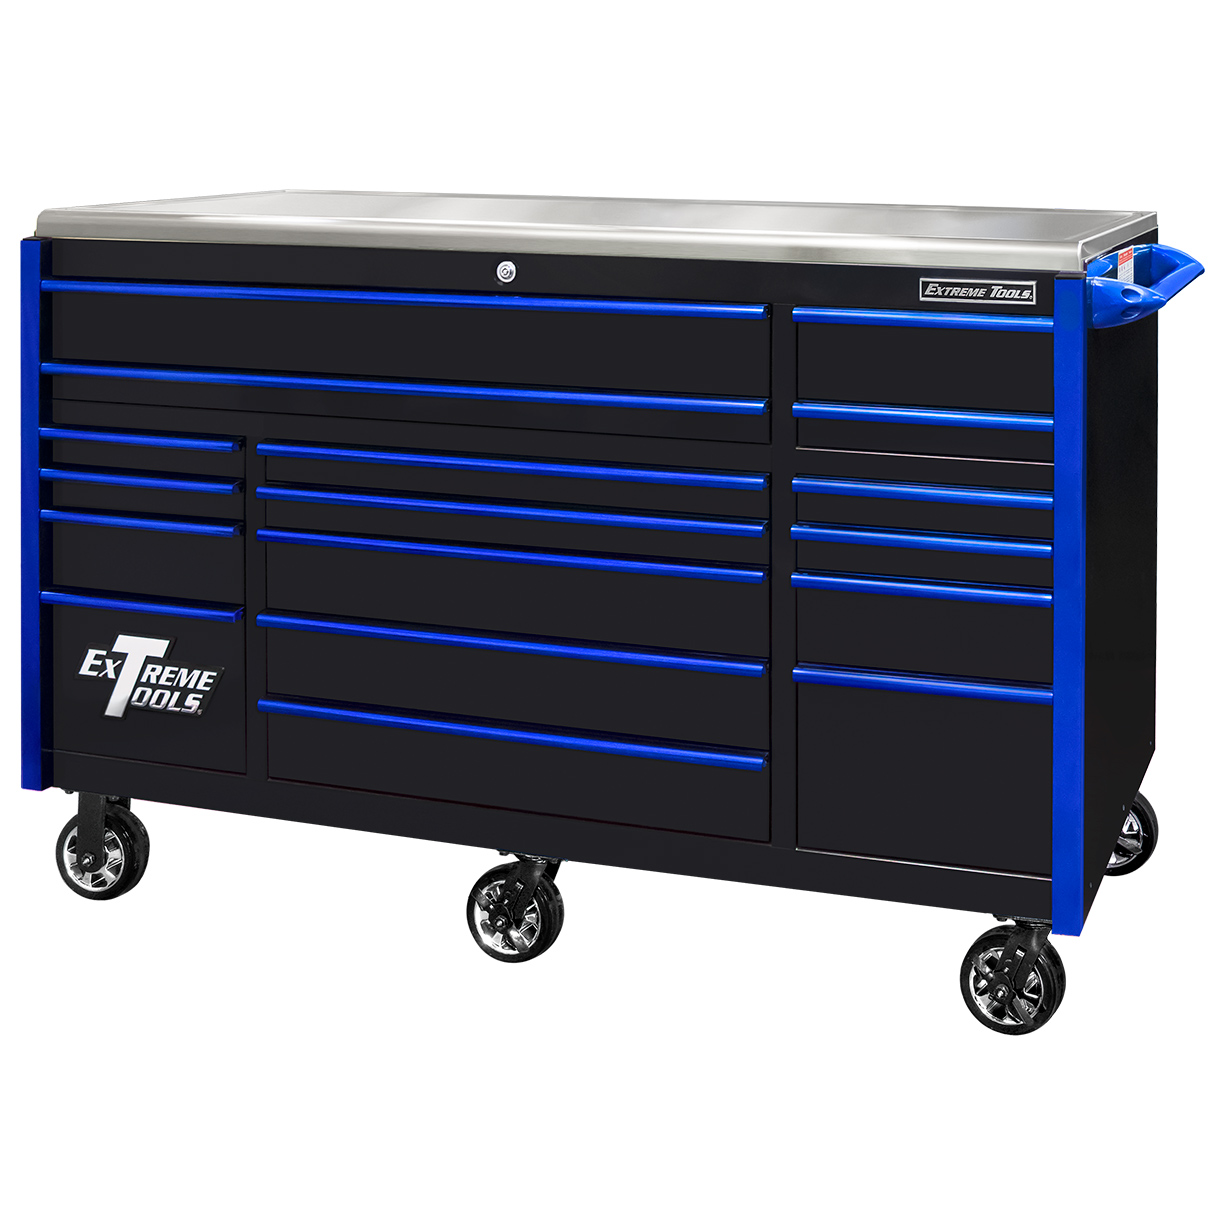 Extreme Tools EXQ Series 72 17-Drawer Professional Triple Bank Roller - Black w/Blue Drawer Pulls